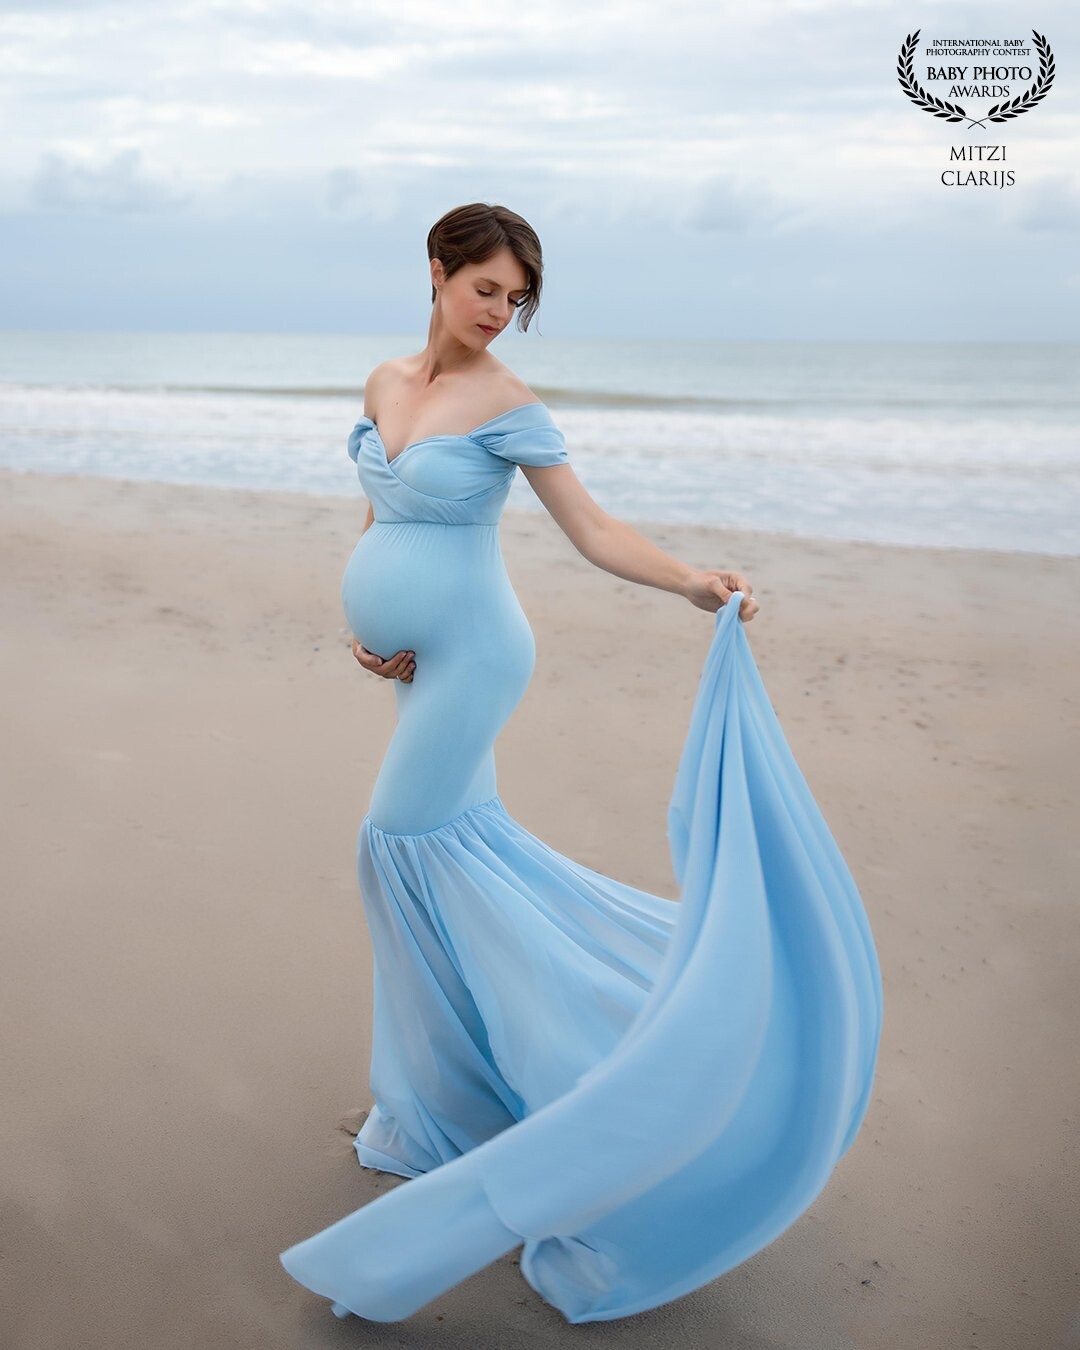 This gorgeous mom looks so good in this babyblue dress. She really rocked every pose, dress and picture of her shoot. I also love the color of the dress matching the sky full of clouds.